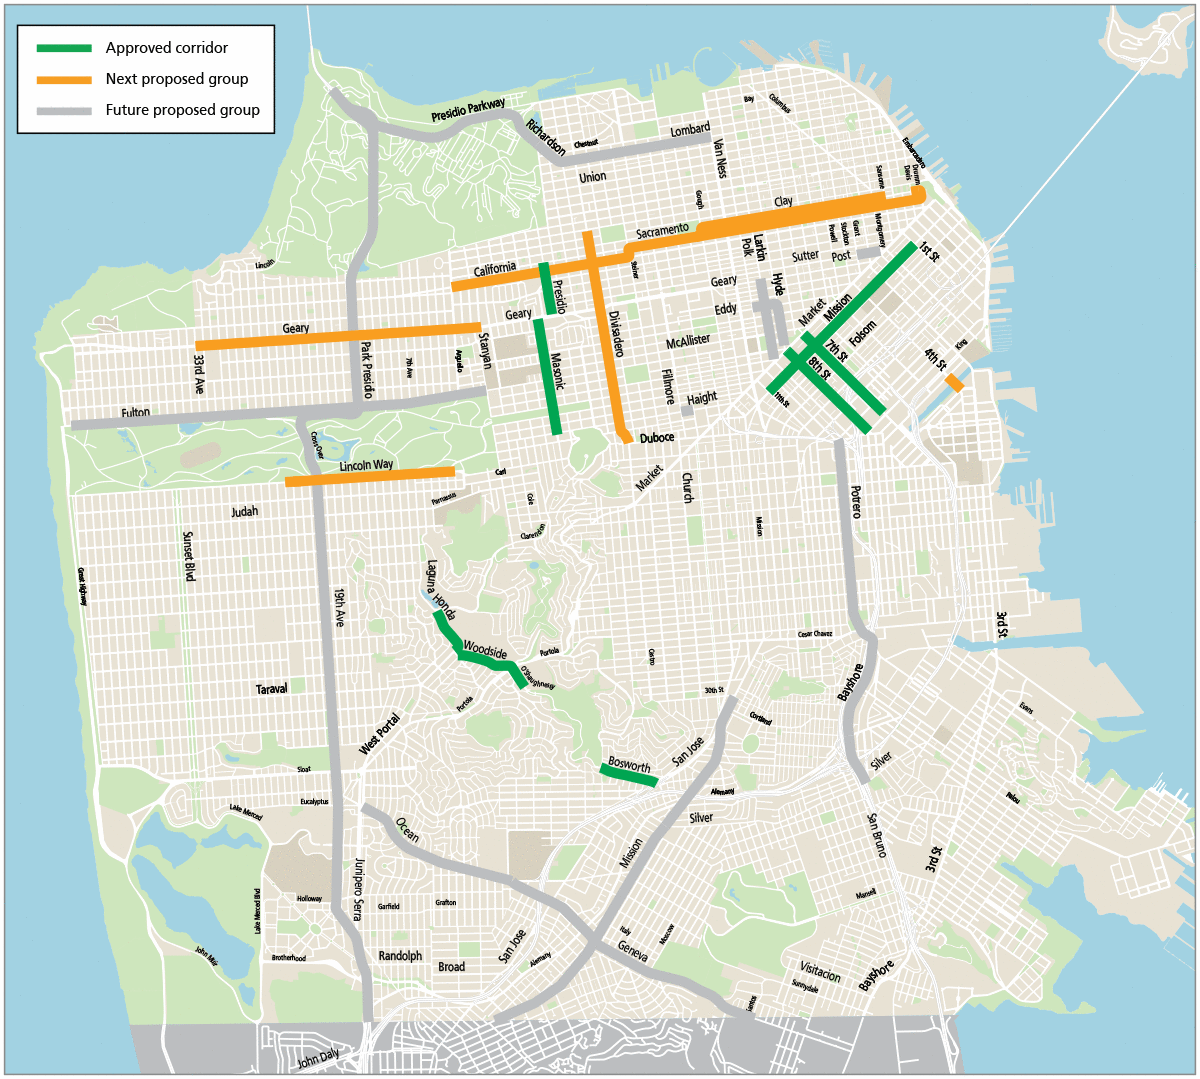 Map of approved and proposed temporary emergency transit lanes. Next proposed corridors include Geary Boulevard, Lincoln Way, Divisadero, 4th Street, and California/Clay/Sacramento 